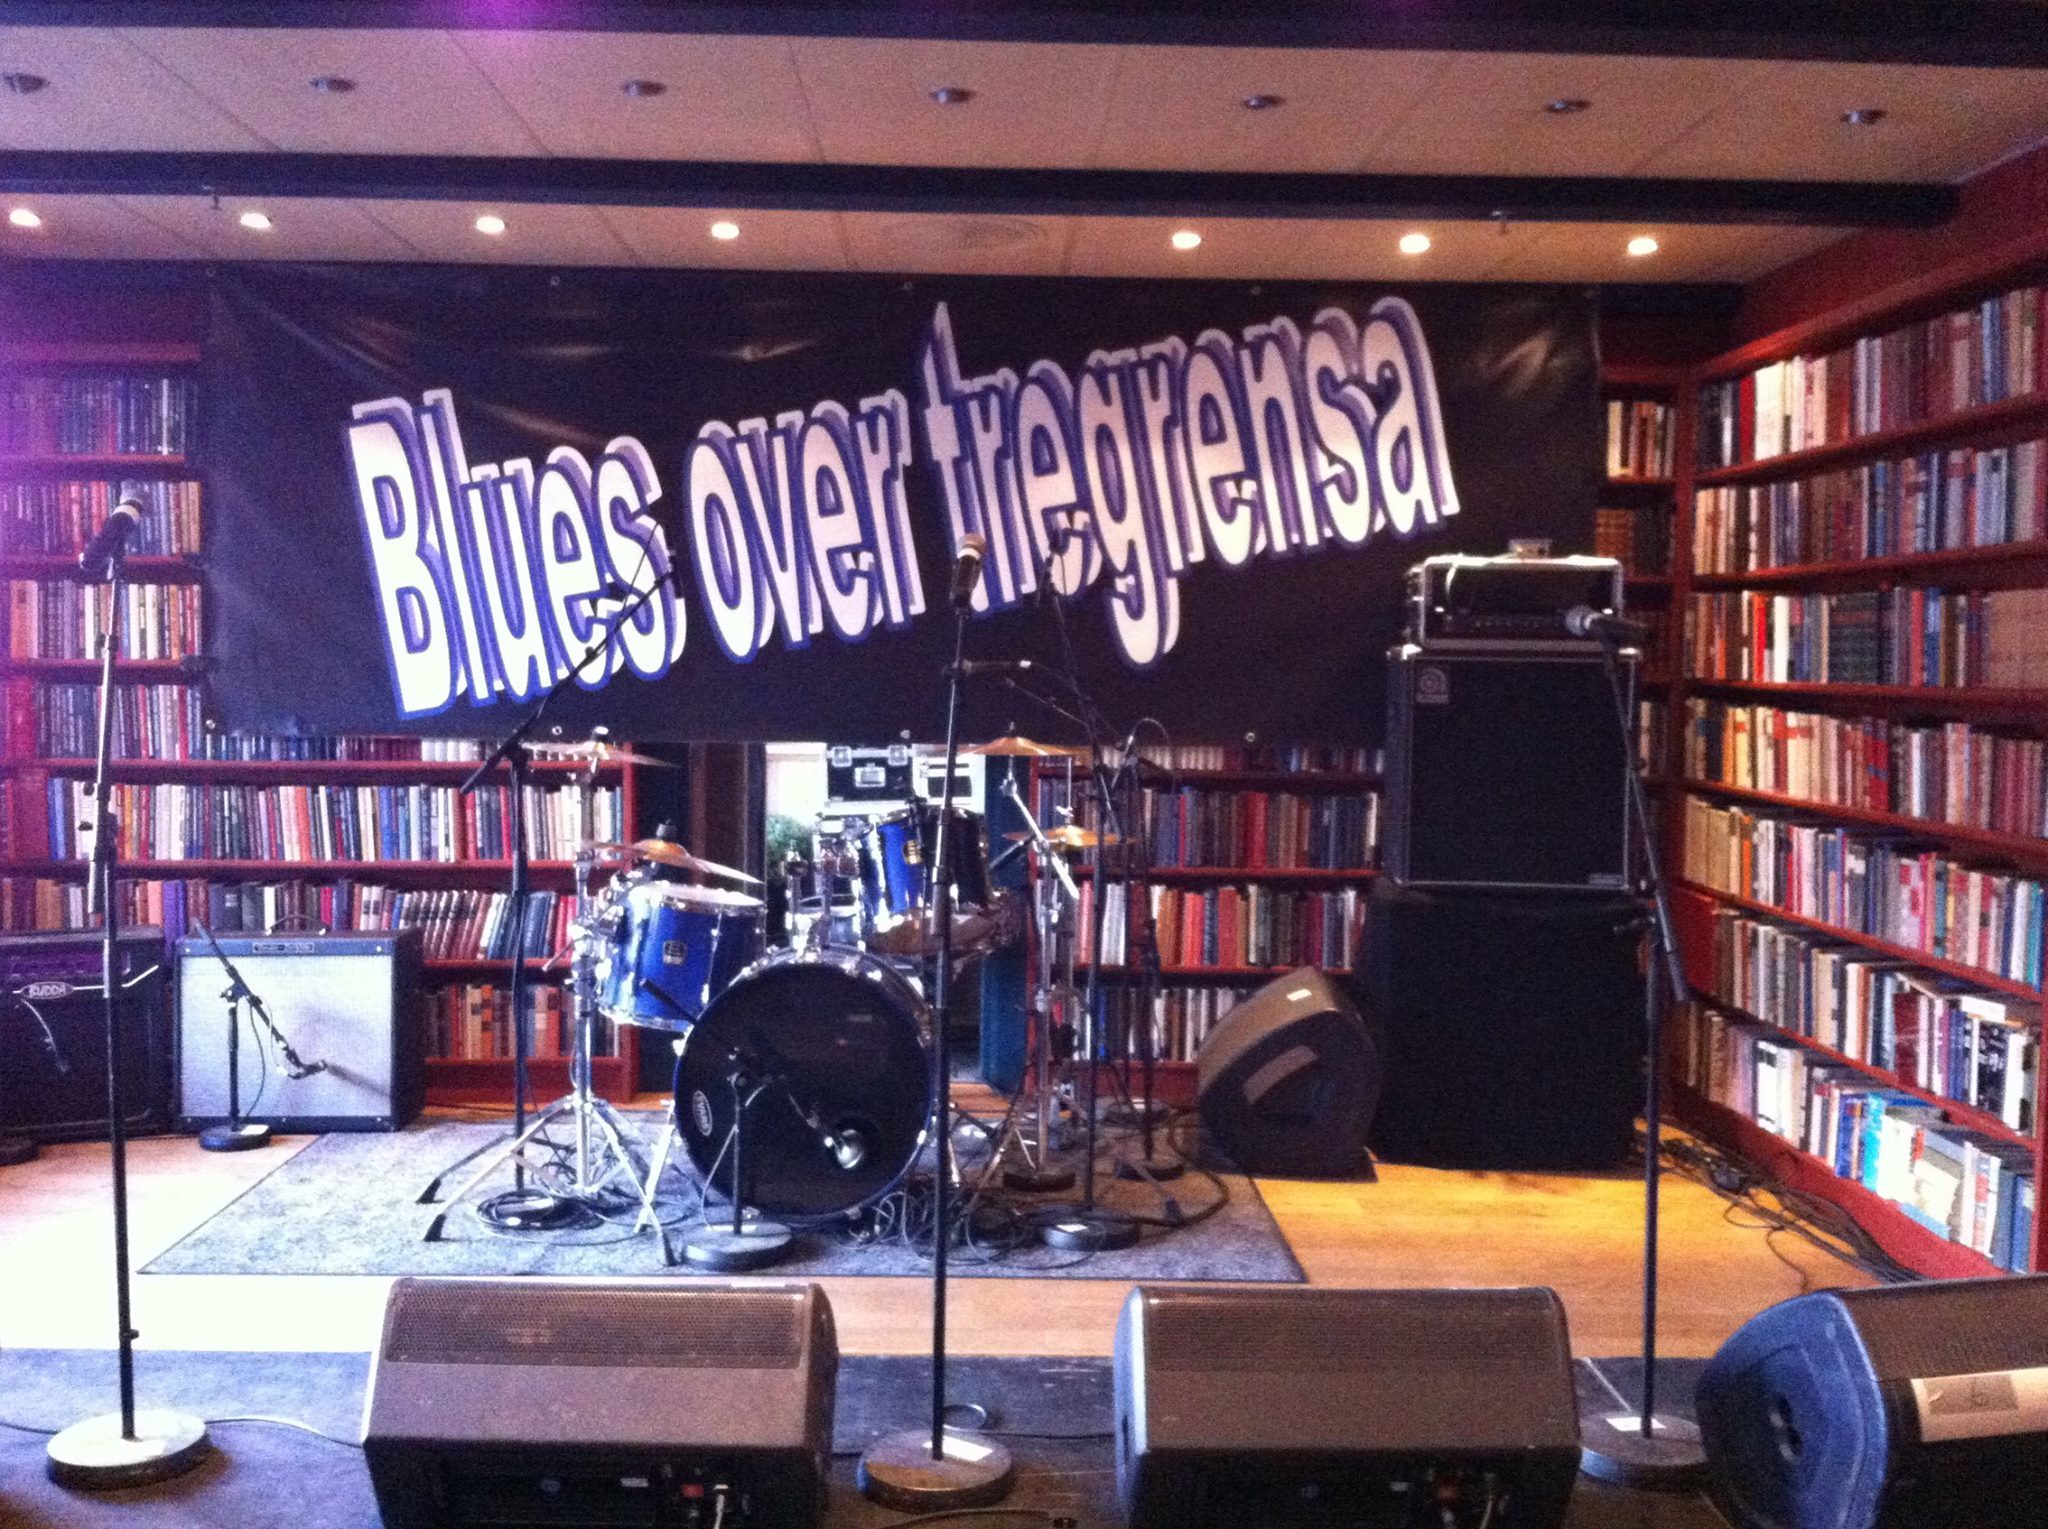 Blues over tregrans